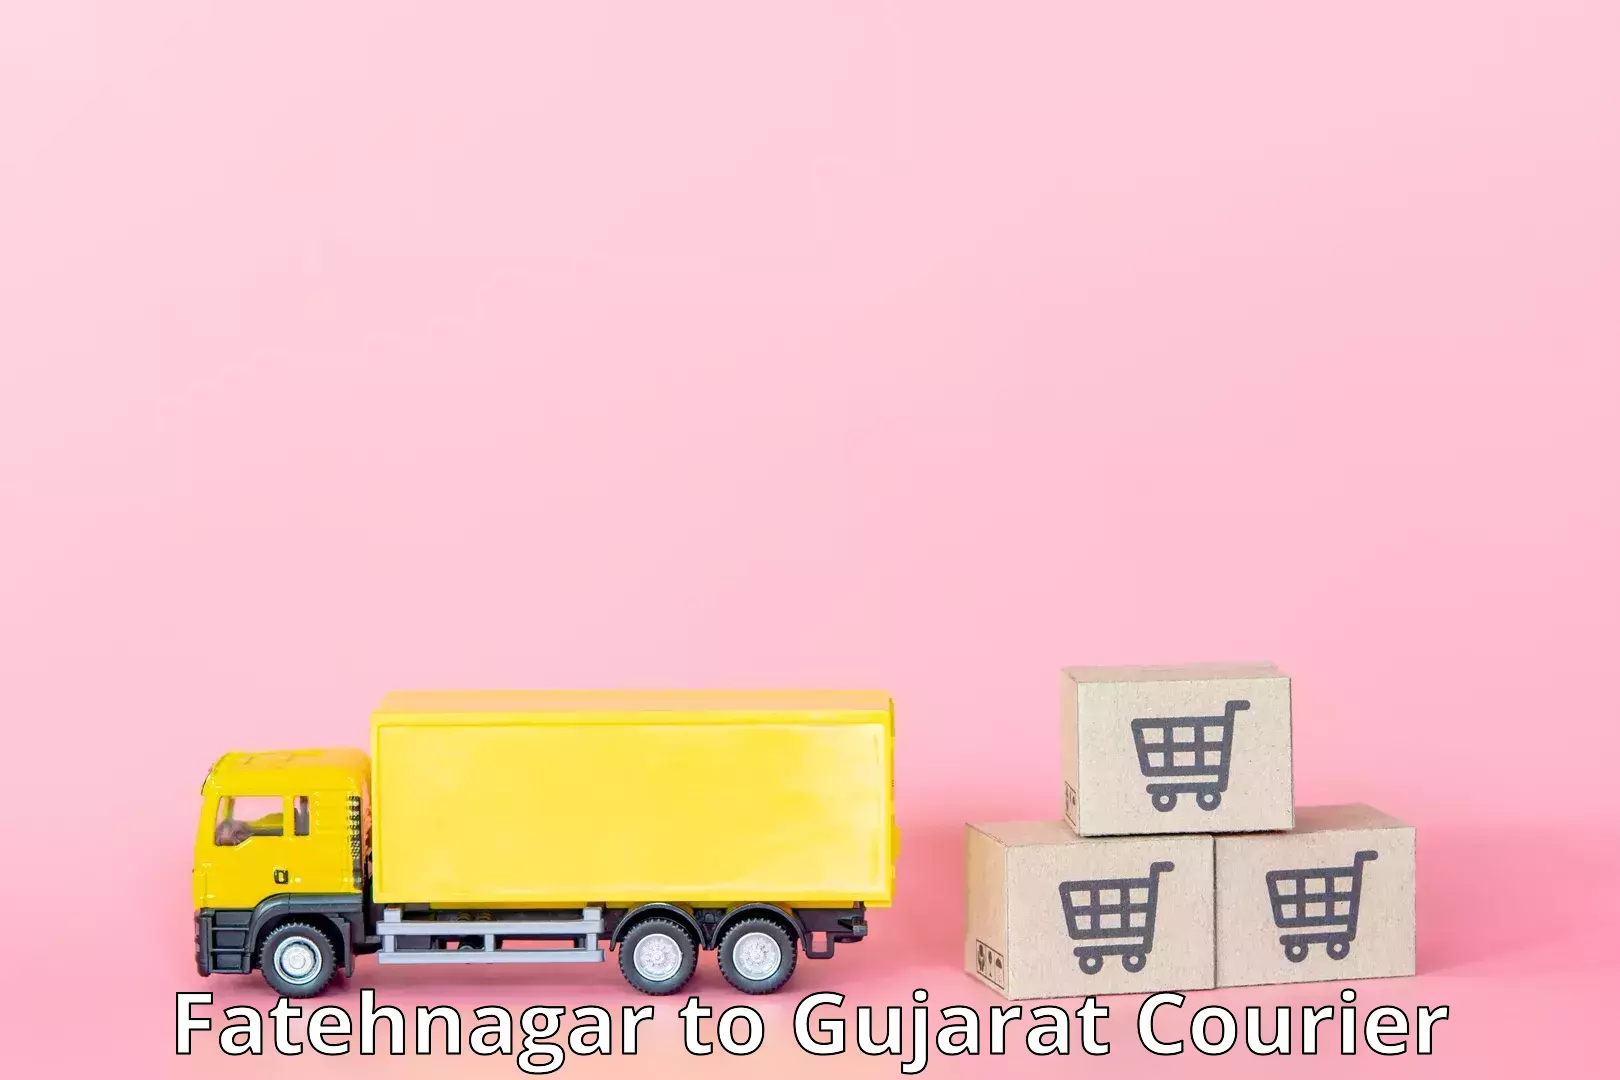 Next-day freight services Fatehnagar to Ahmedabad